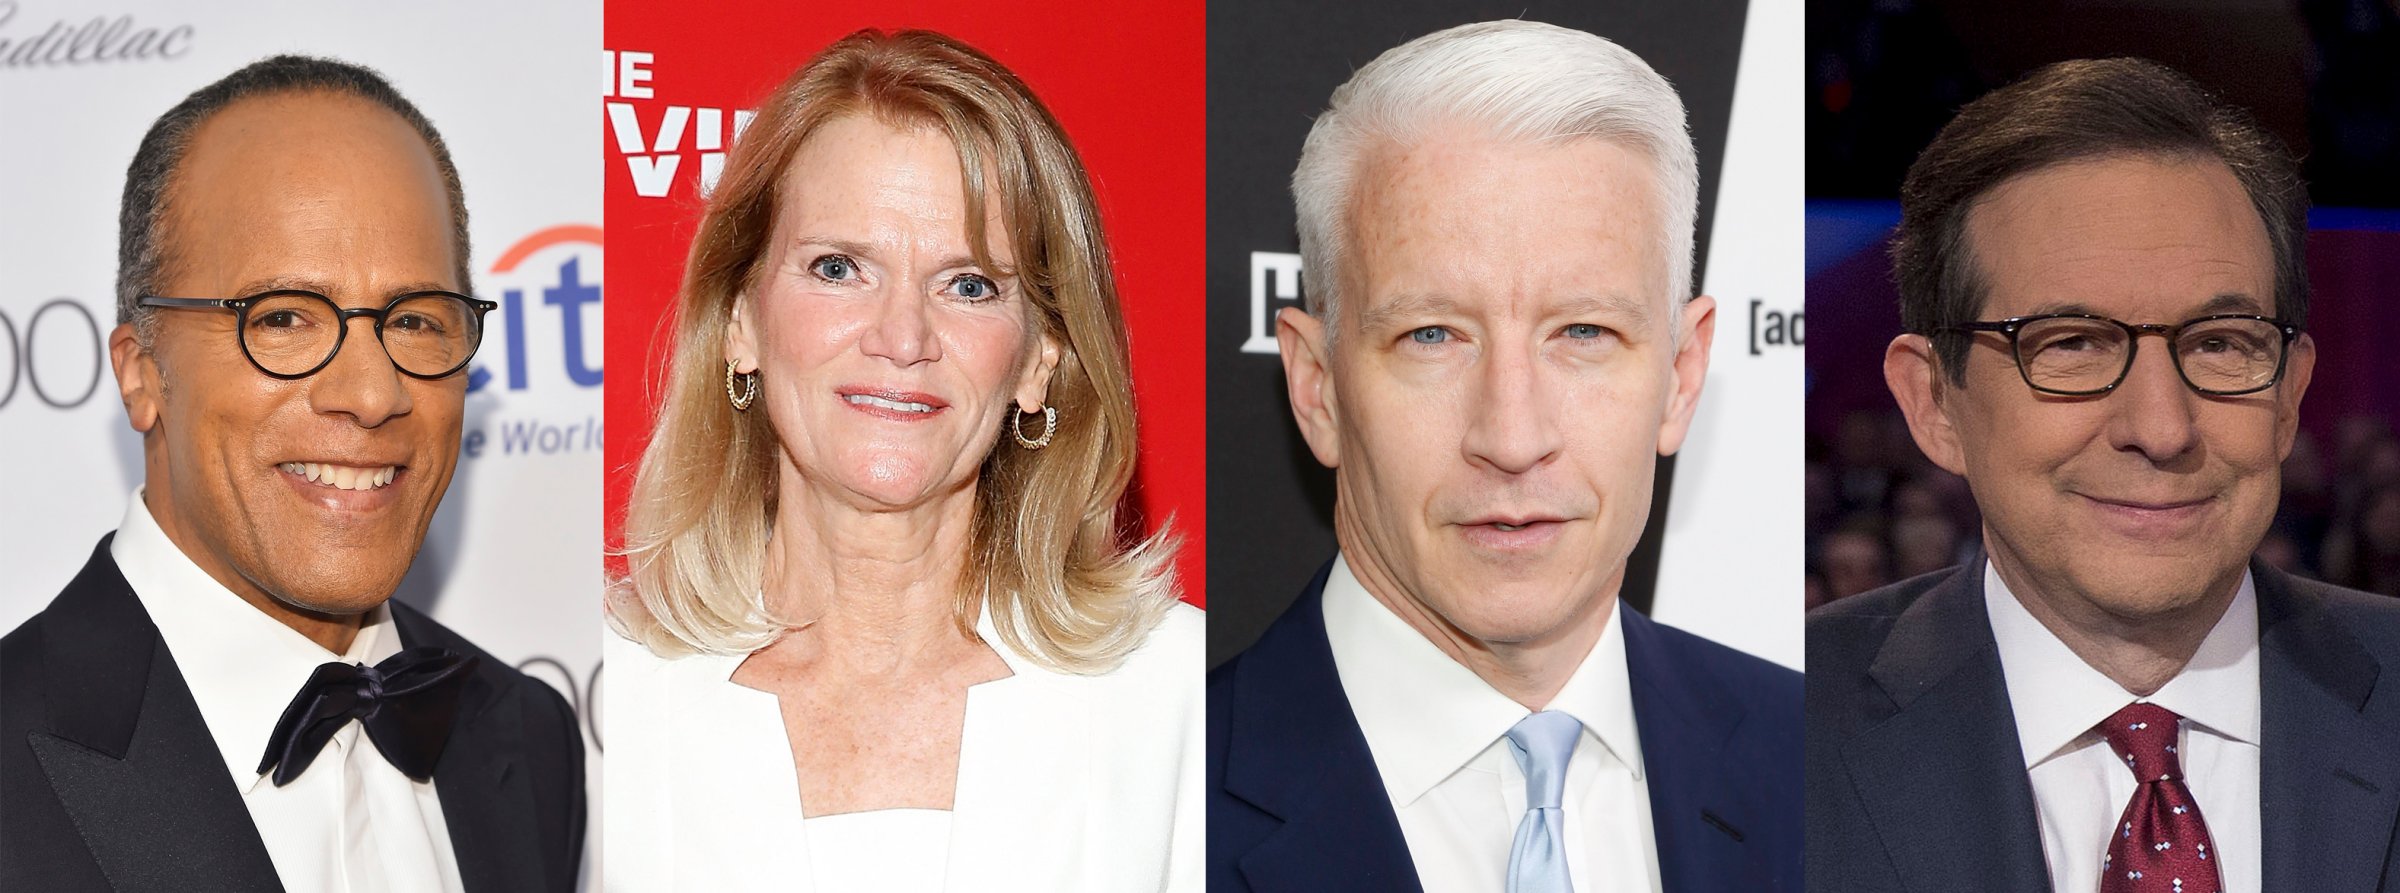 Lester Holt, Martha Raddatz, Anderson Cooper, and Chris Wallace.